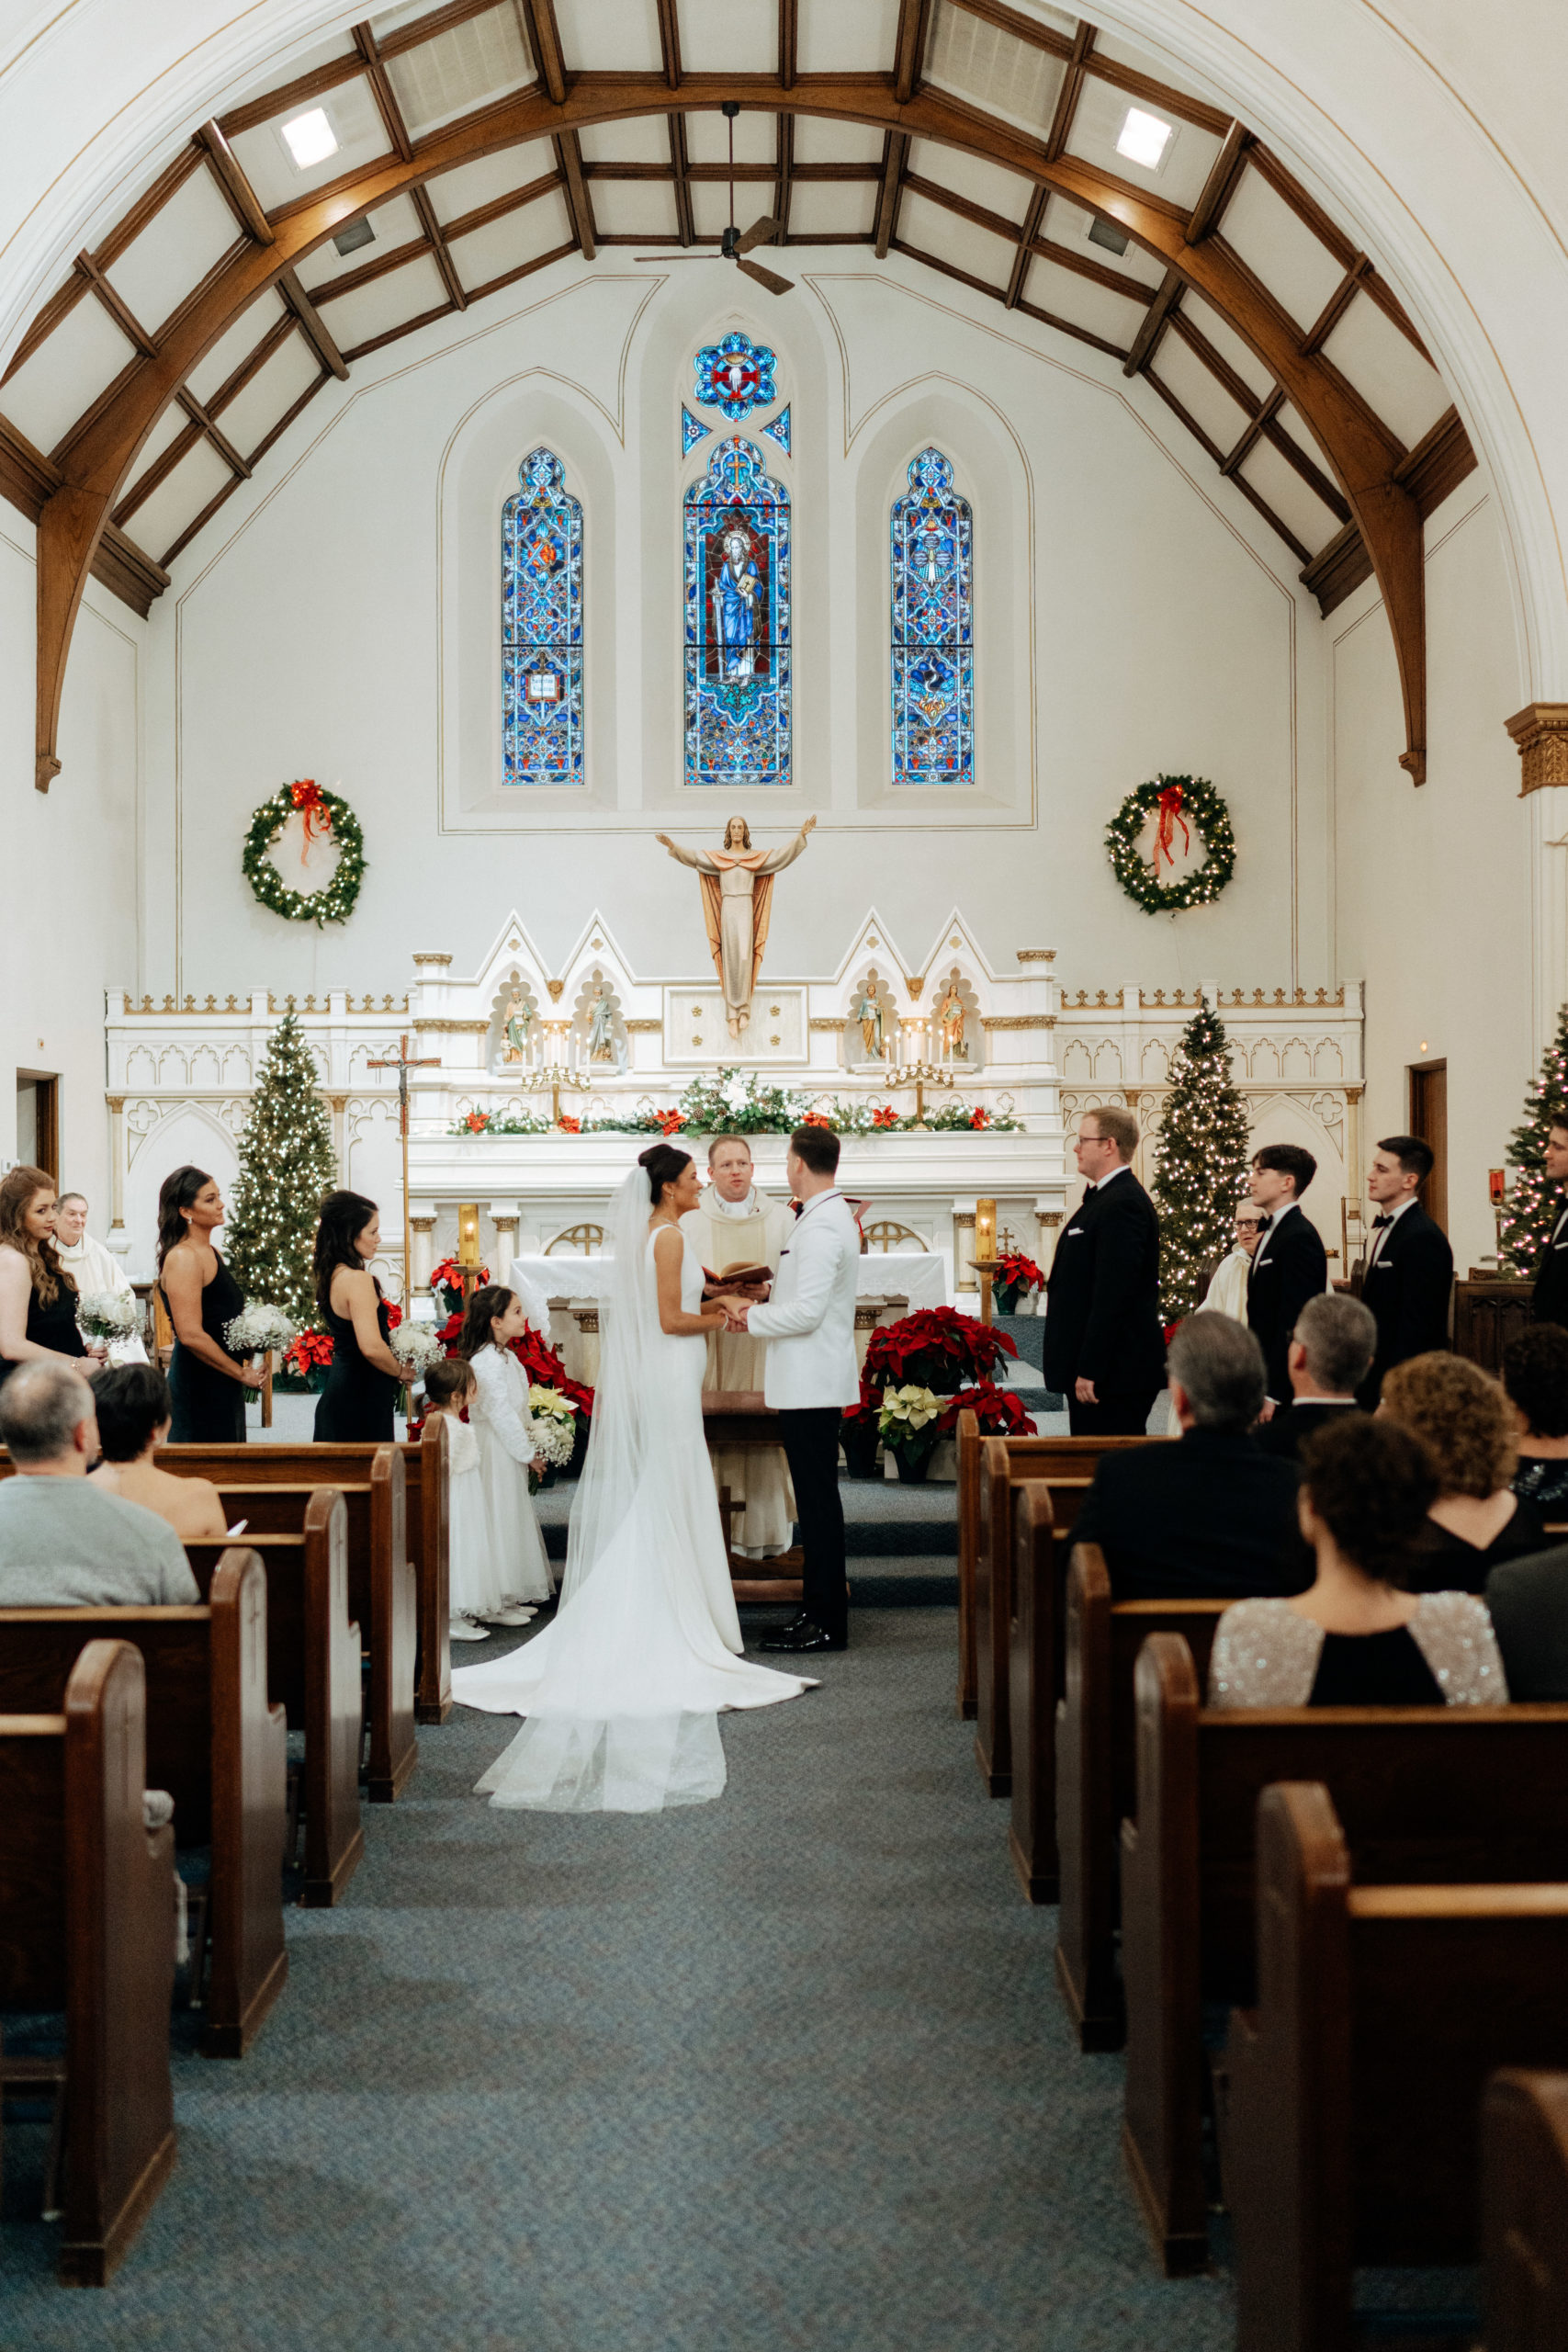 This is a picture of a wedding ceremony in Cedar Rapids, IA